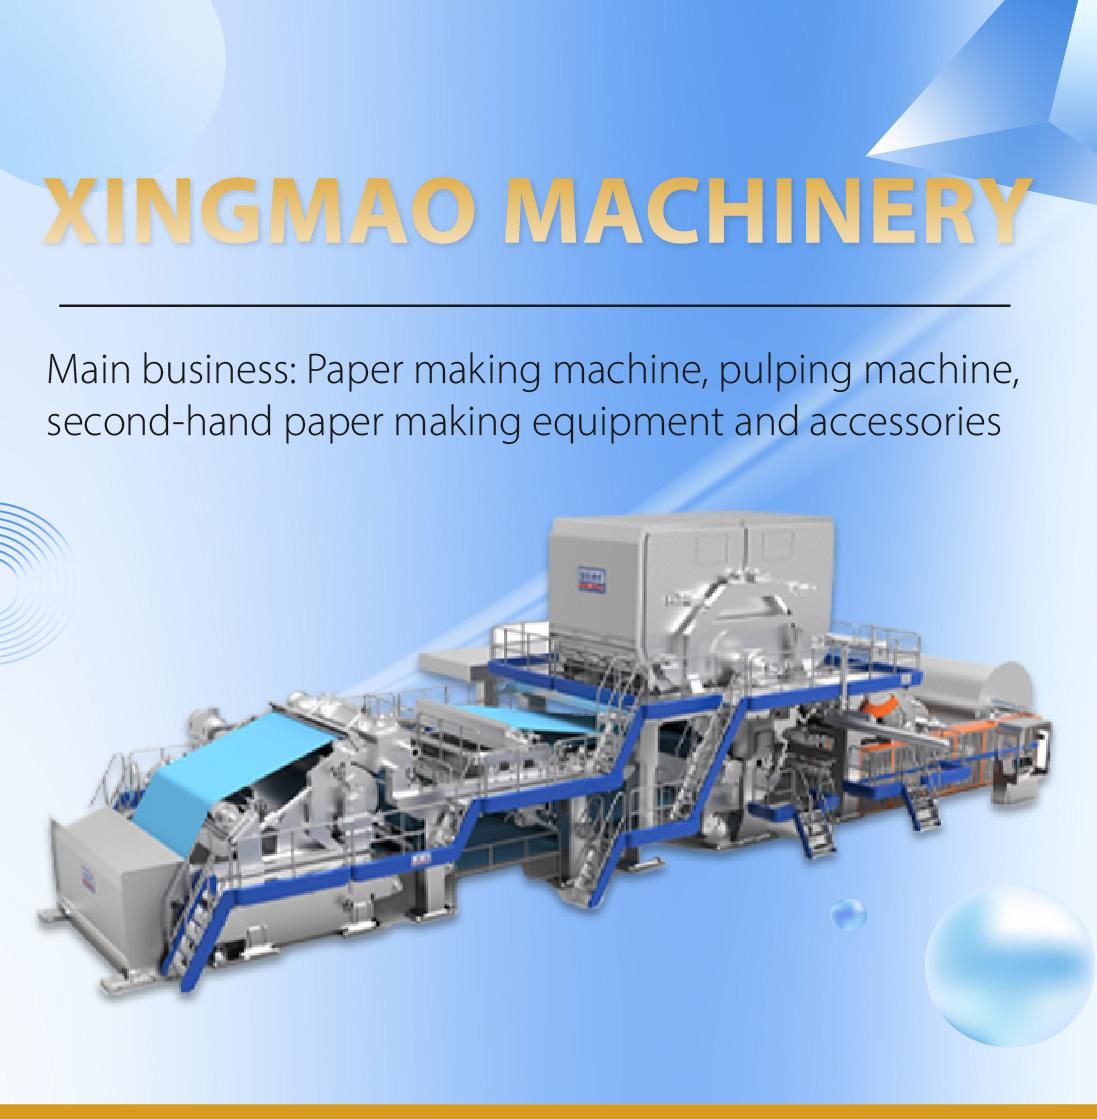 Quality Assurance of Paper Machine Propulsion Machine Pulp Propulsion Machine Pulp Propulsion Equipment